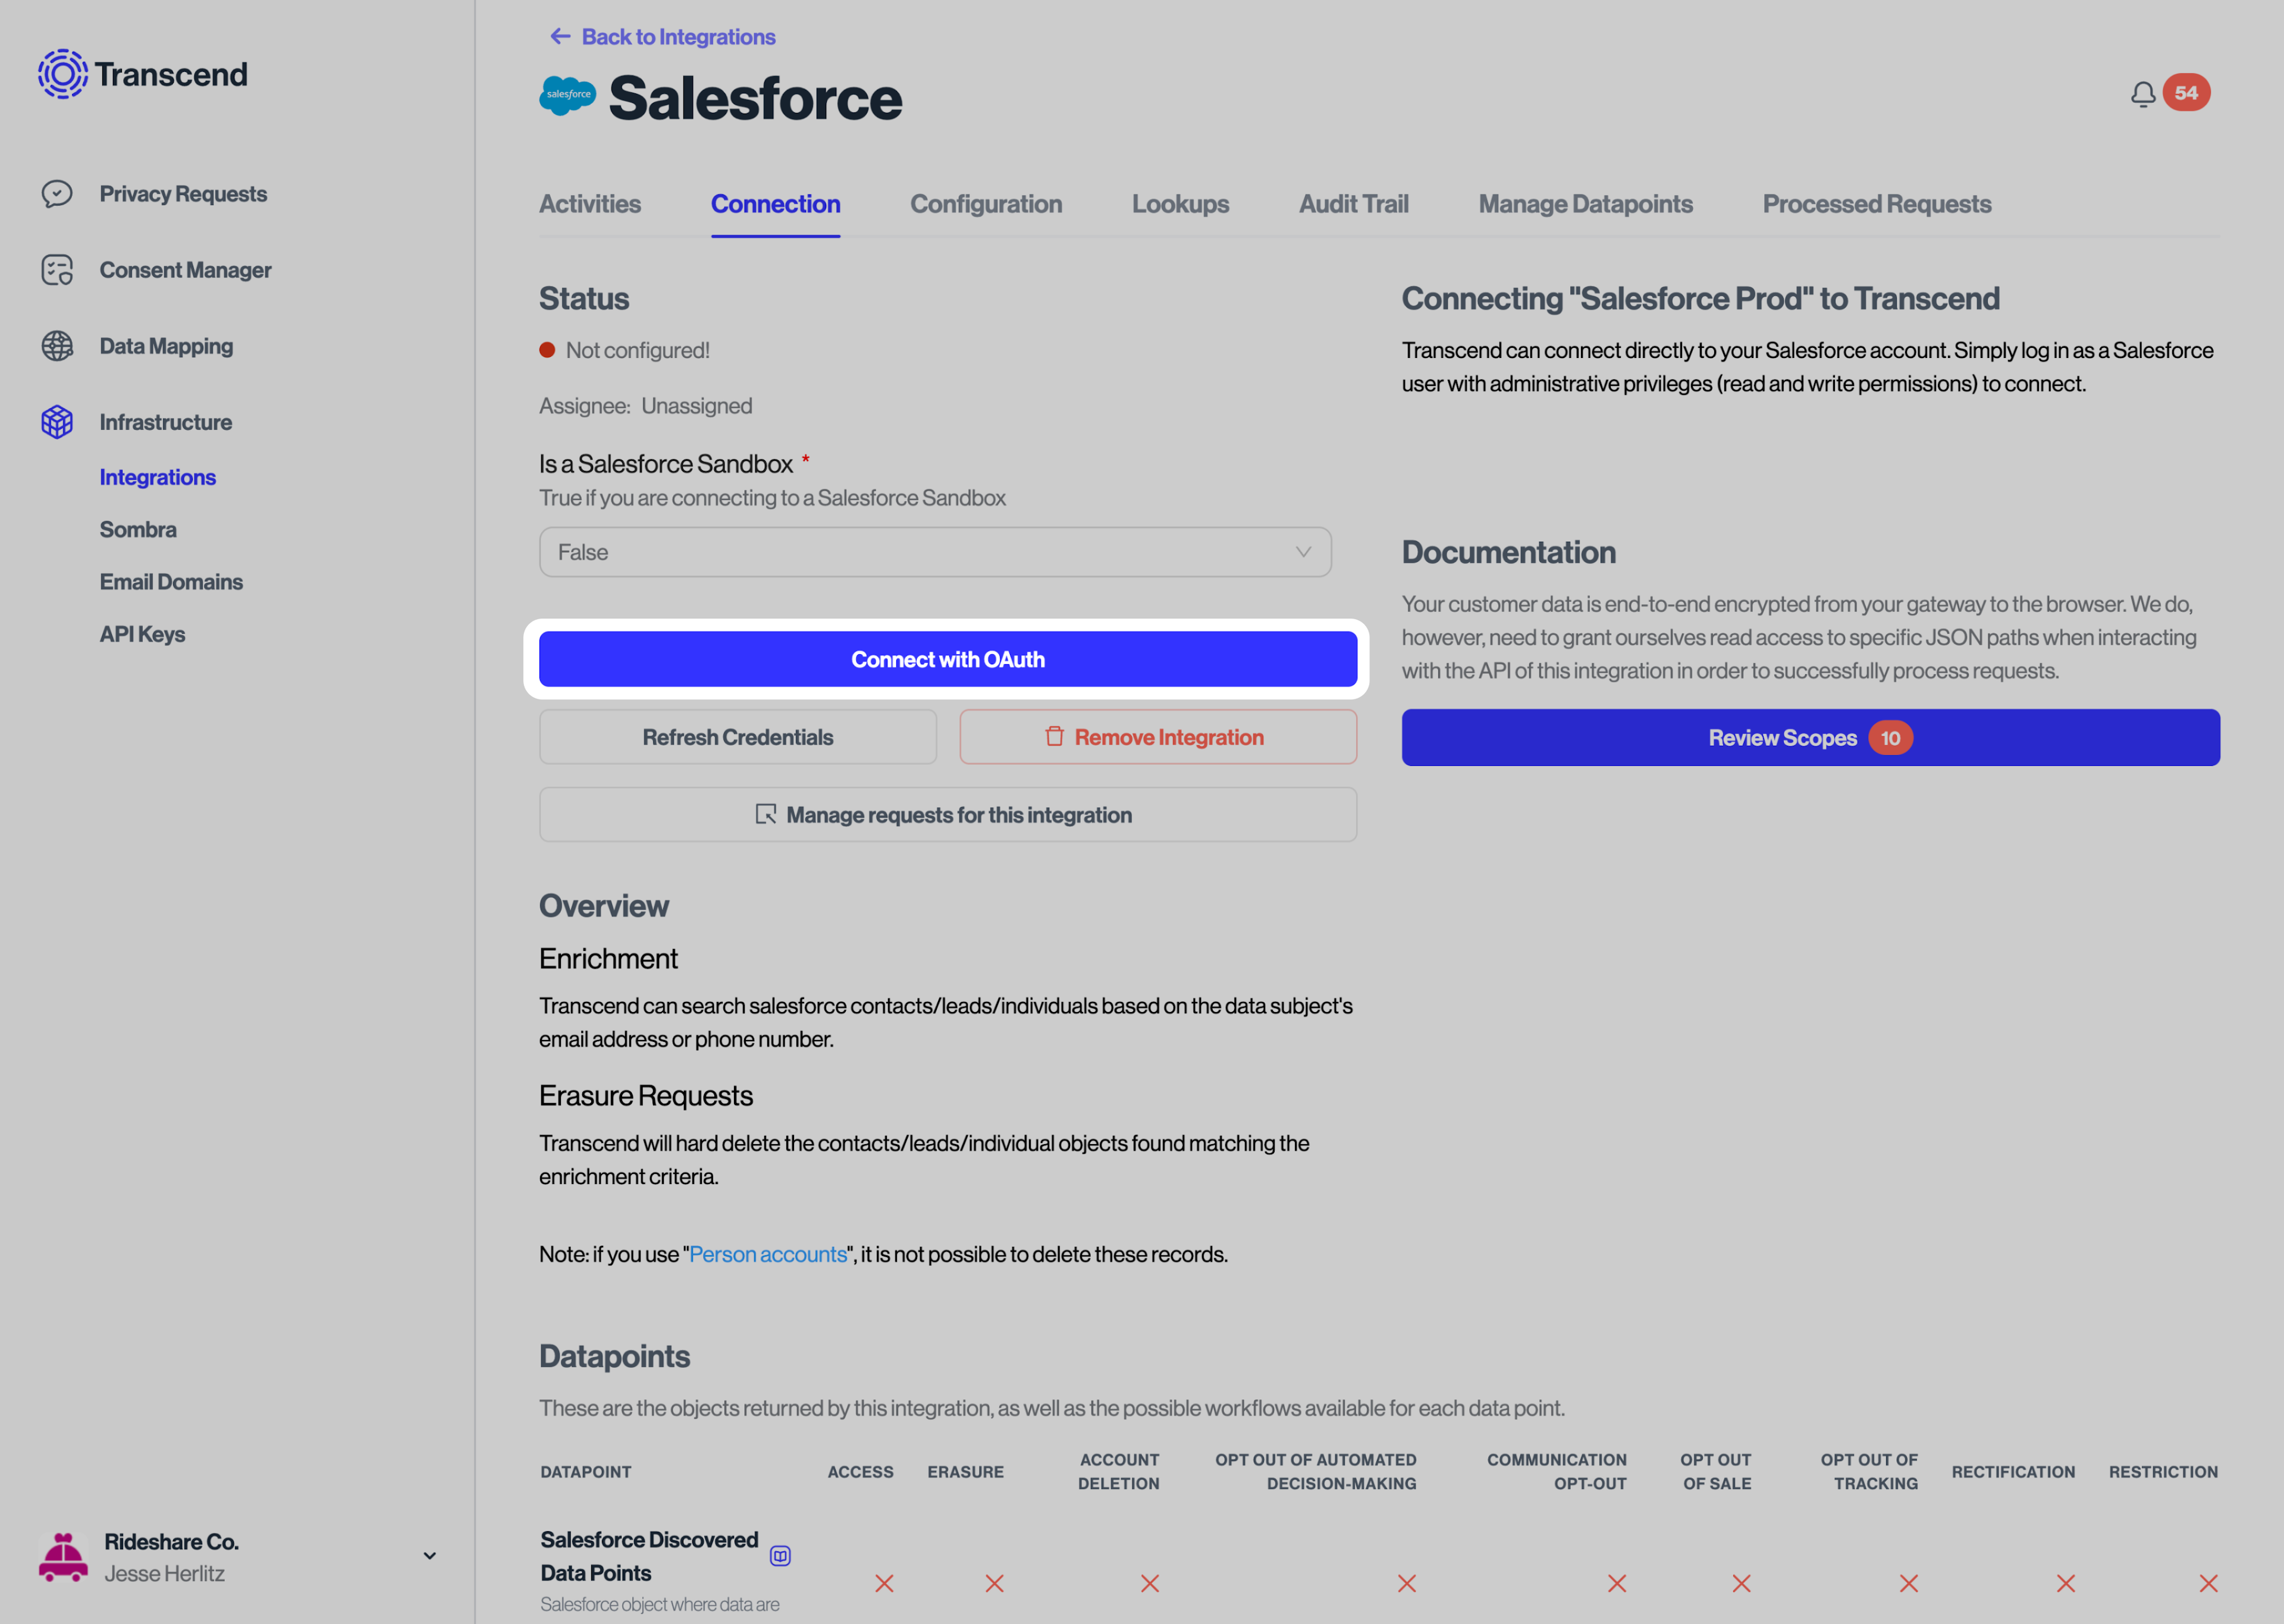 Connecting Salesforce via OAuth